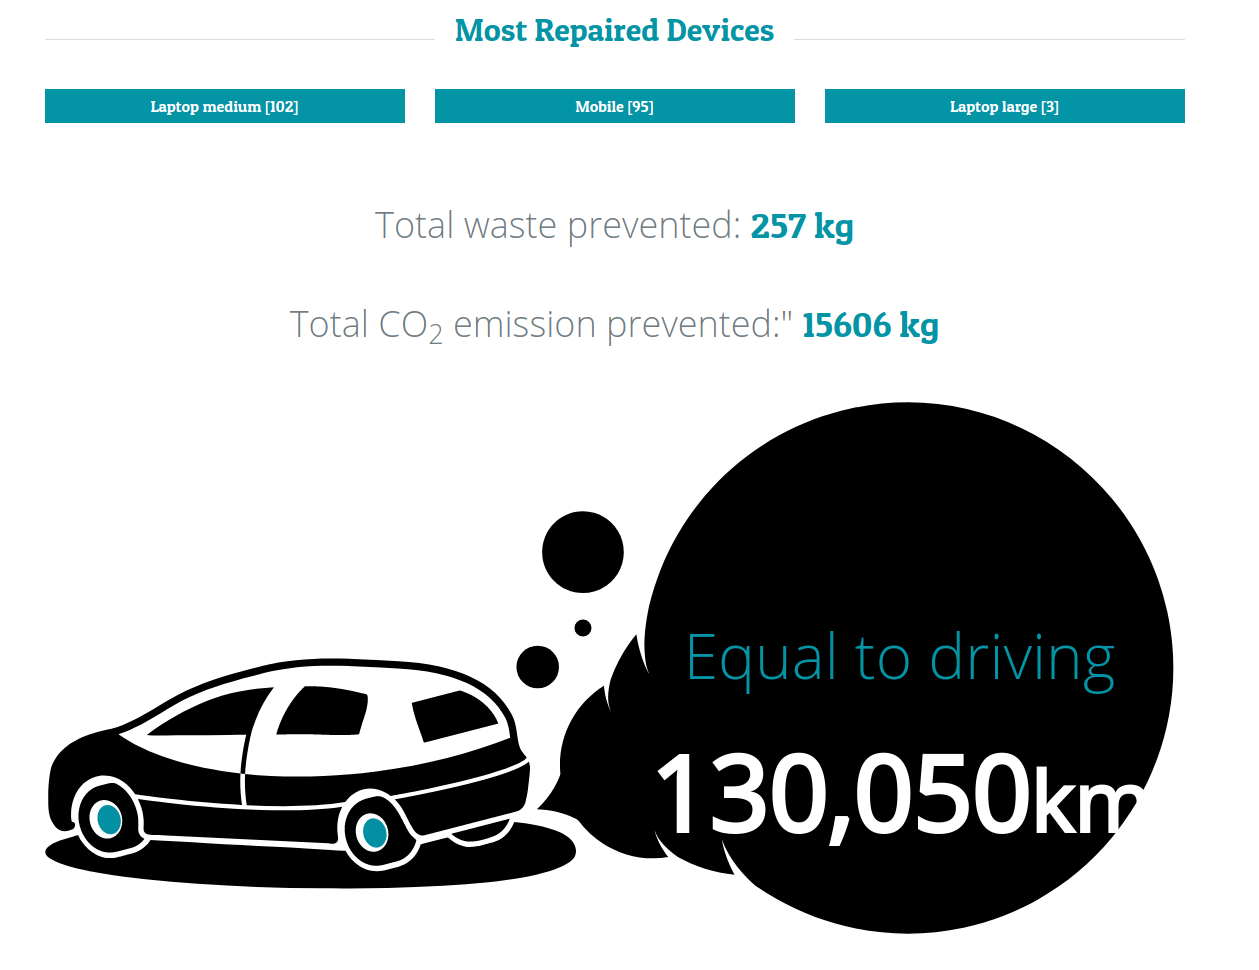 Carbon reduction equivalent of manufacturing 3 new cars.